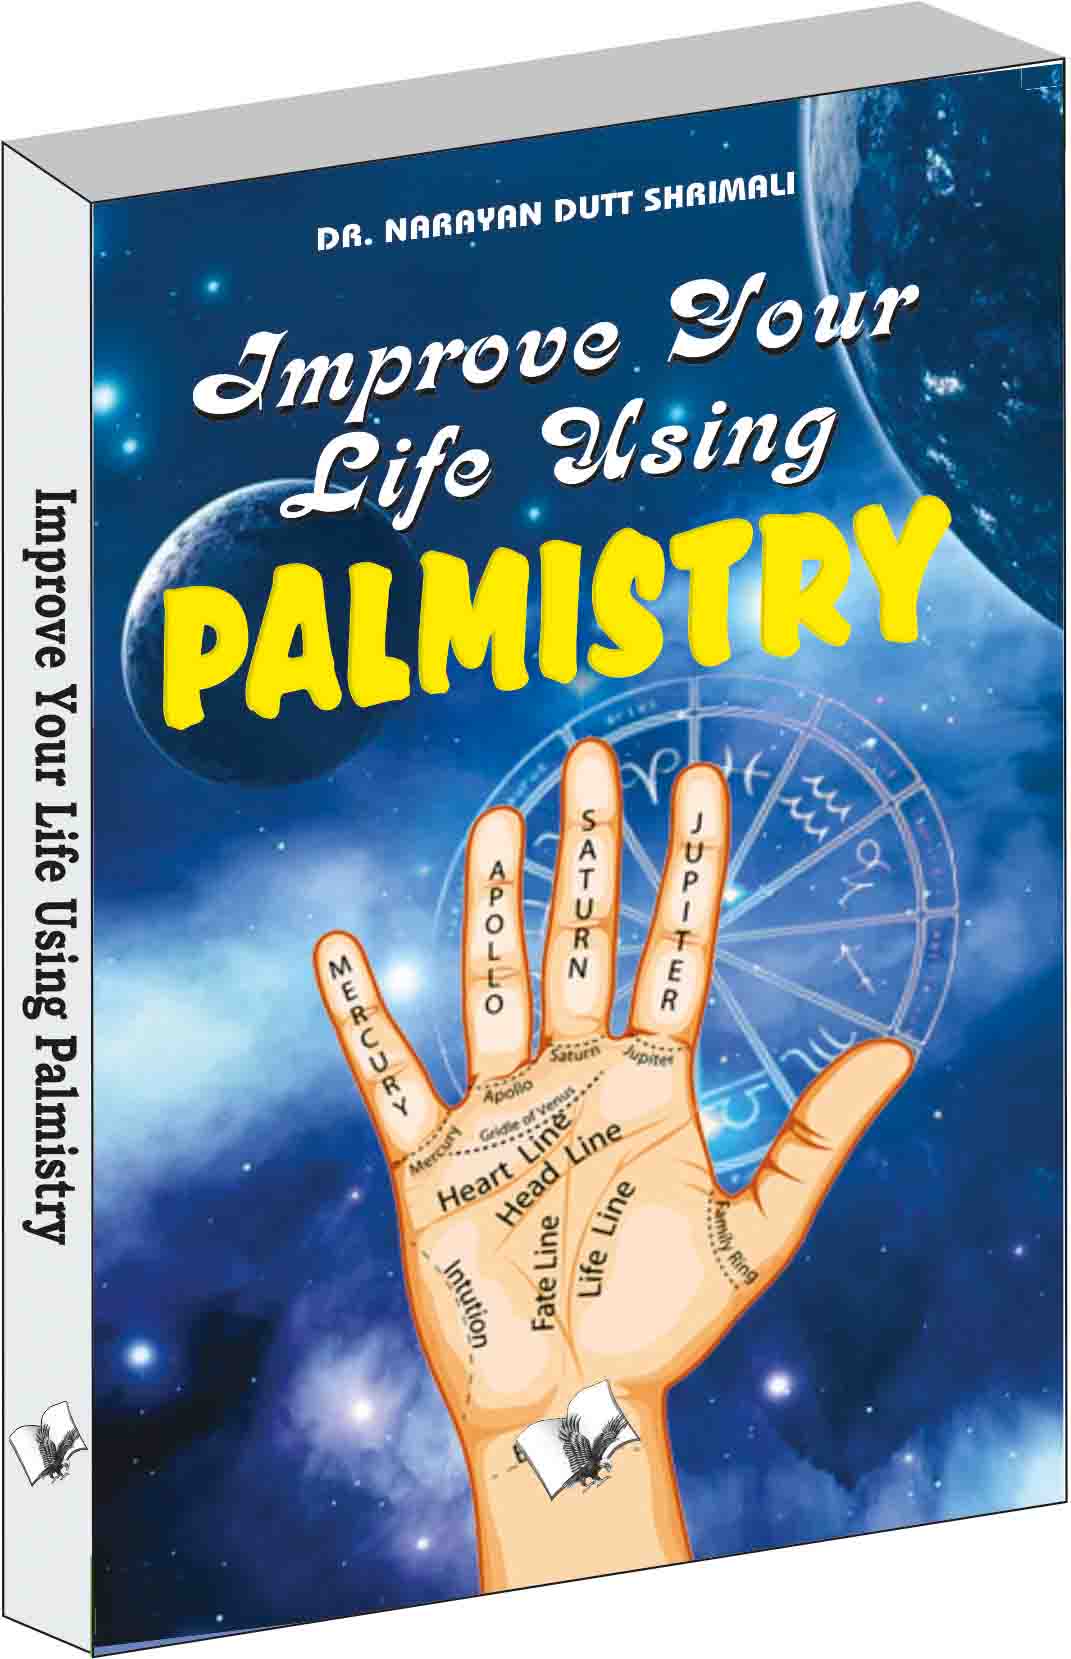 Improve Your Life using Palmistry-Efforts can change lines on your palm